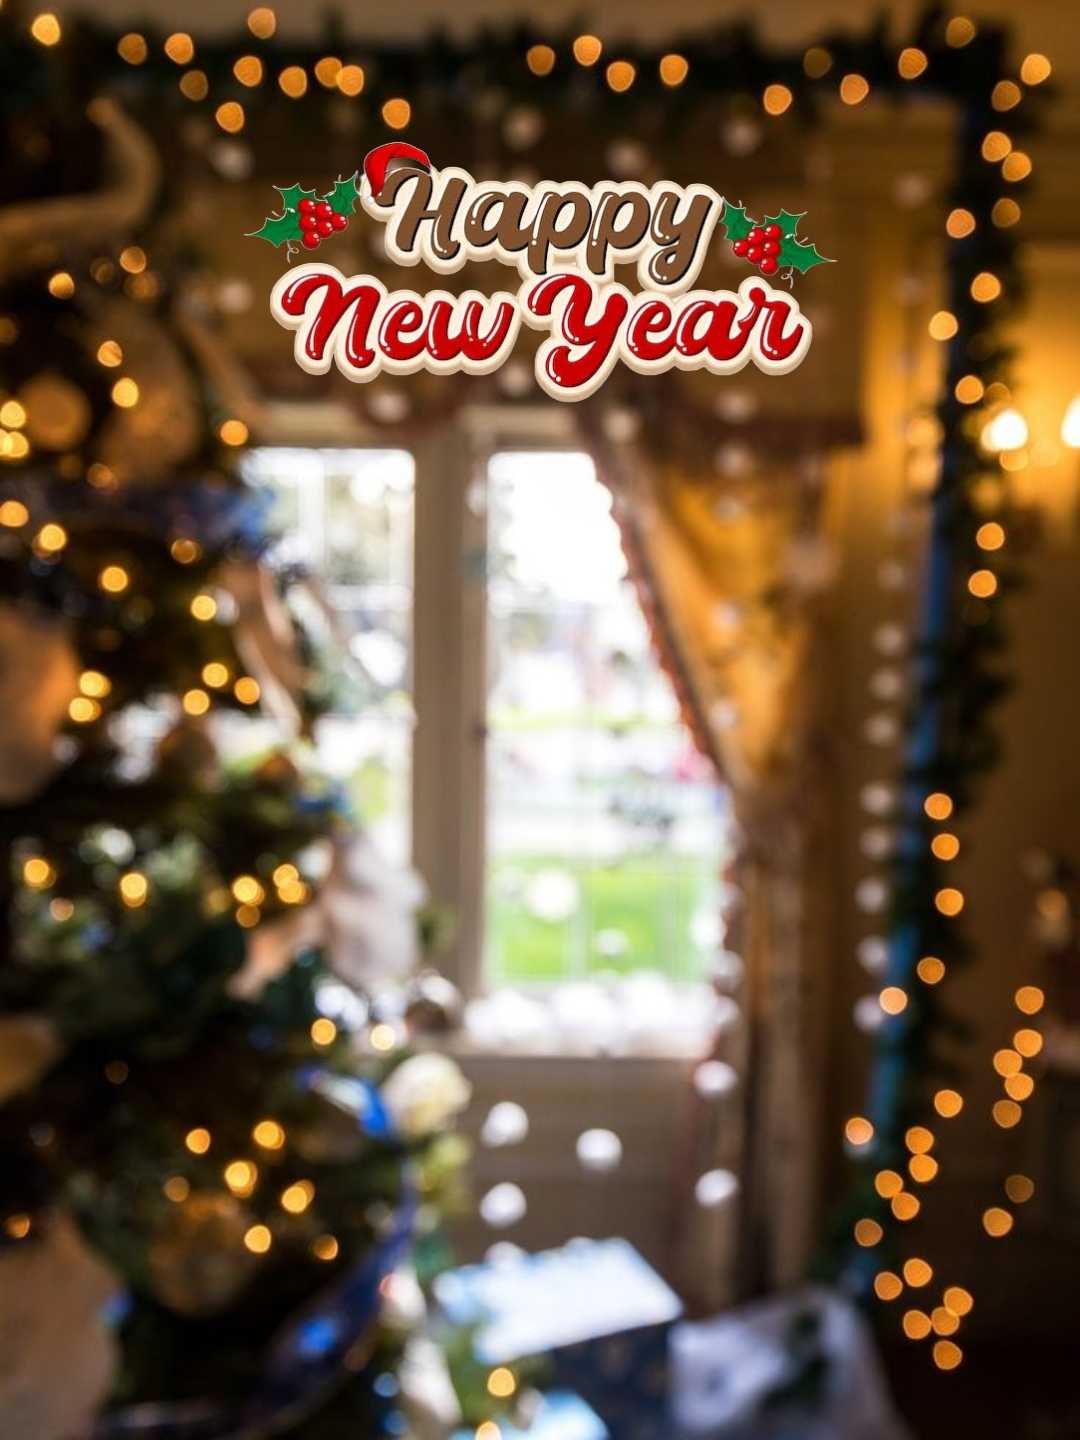 Light Background for Happy New year